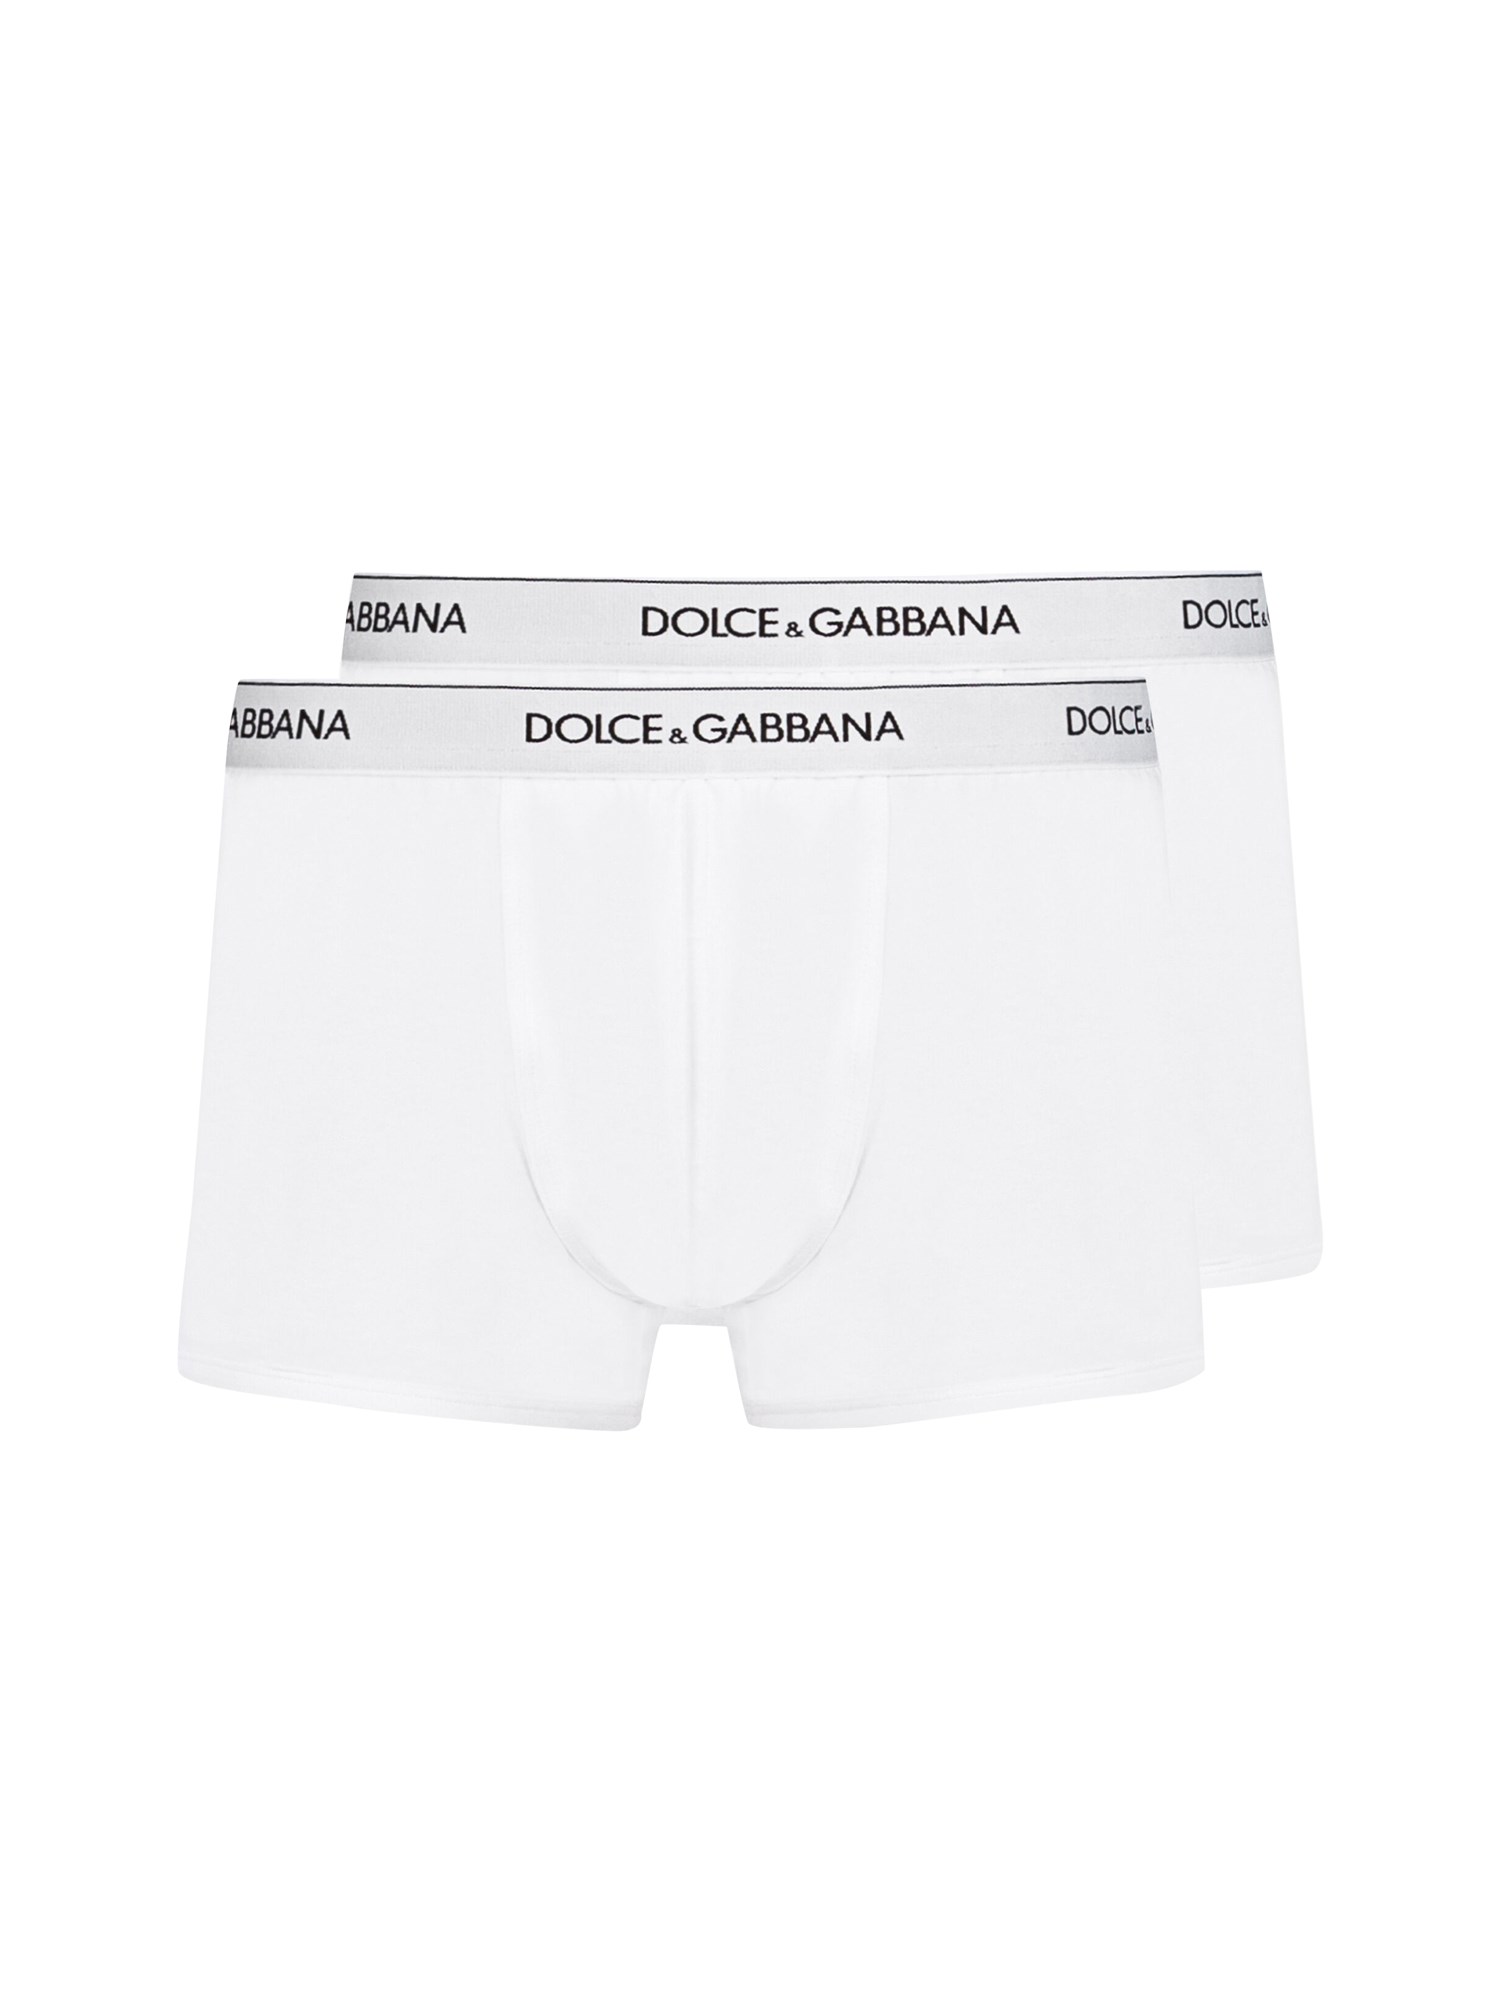 Dolce & Gabbana Two-panties Confection In White